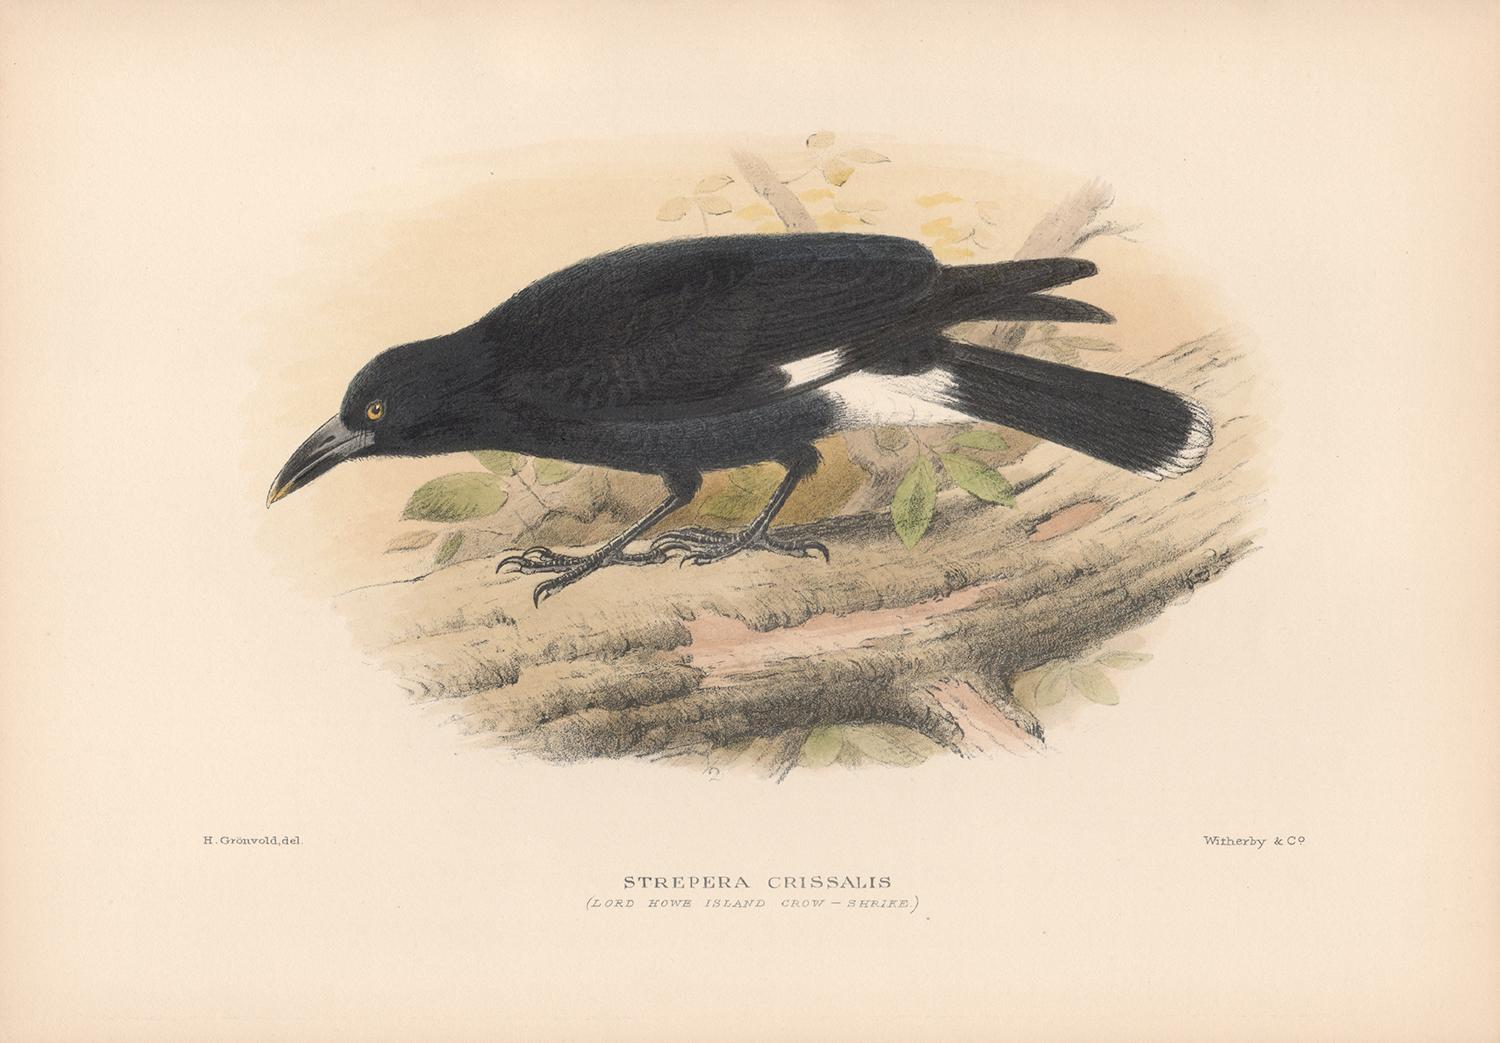 Lord Howe Island Crow-Shrike, Bird lithograph with hand-colouring, 1928